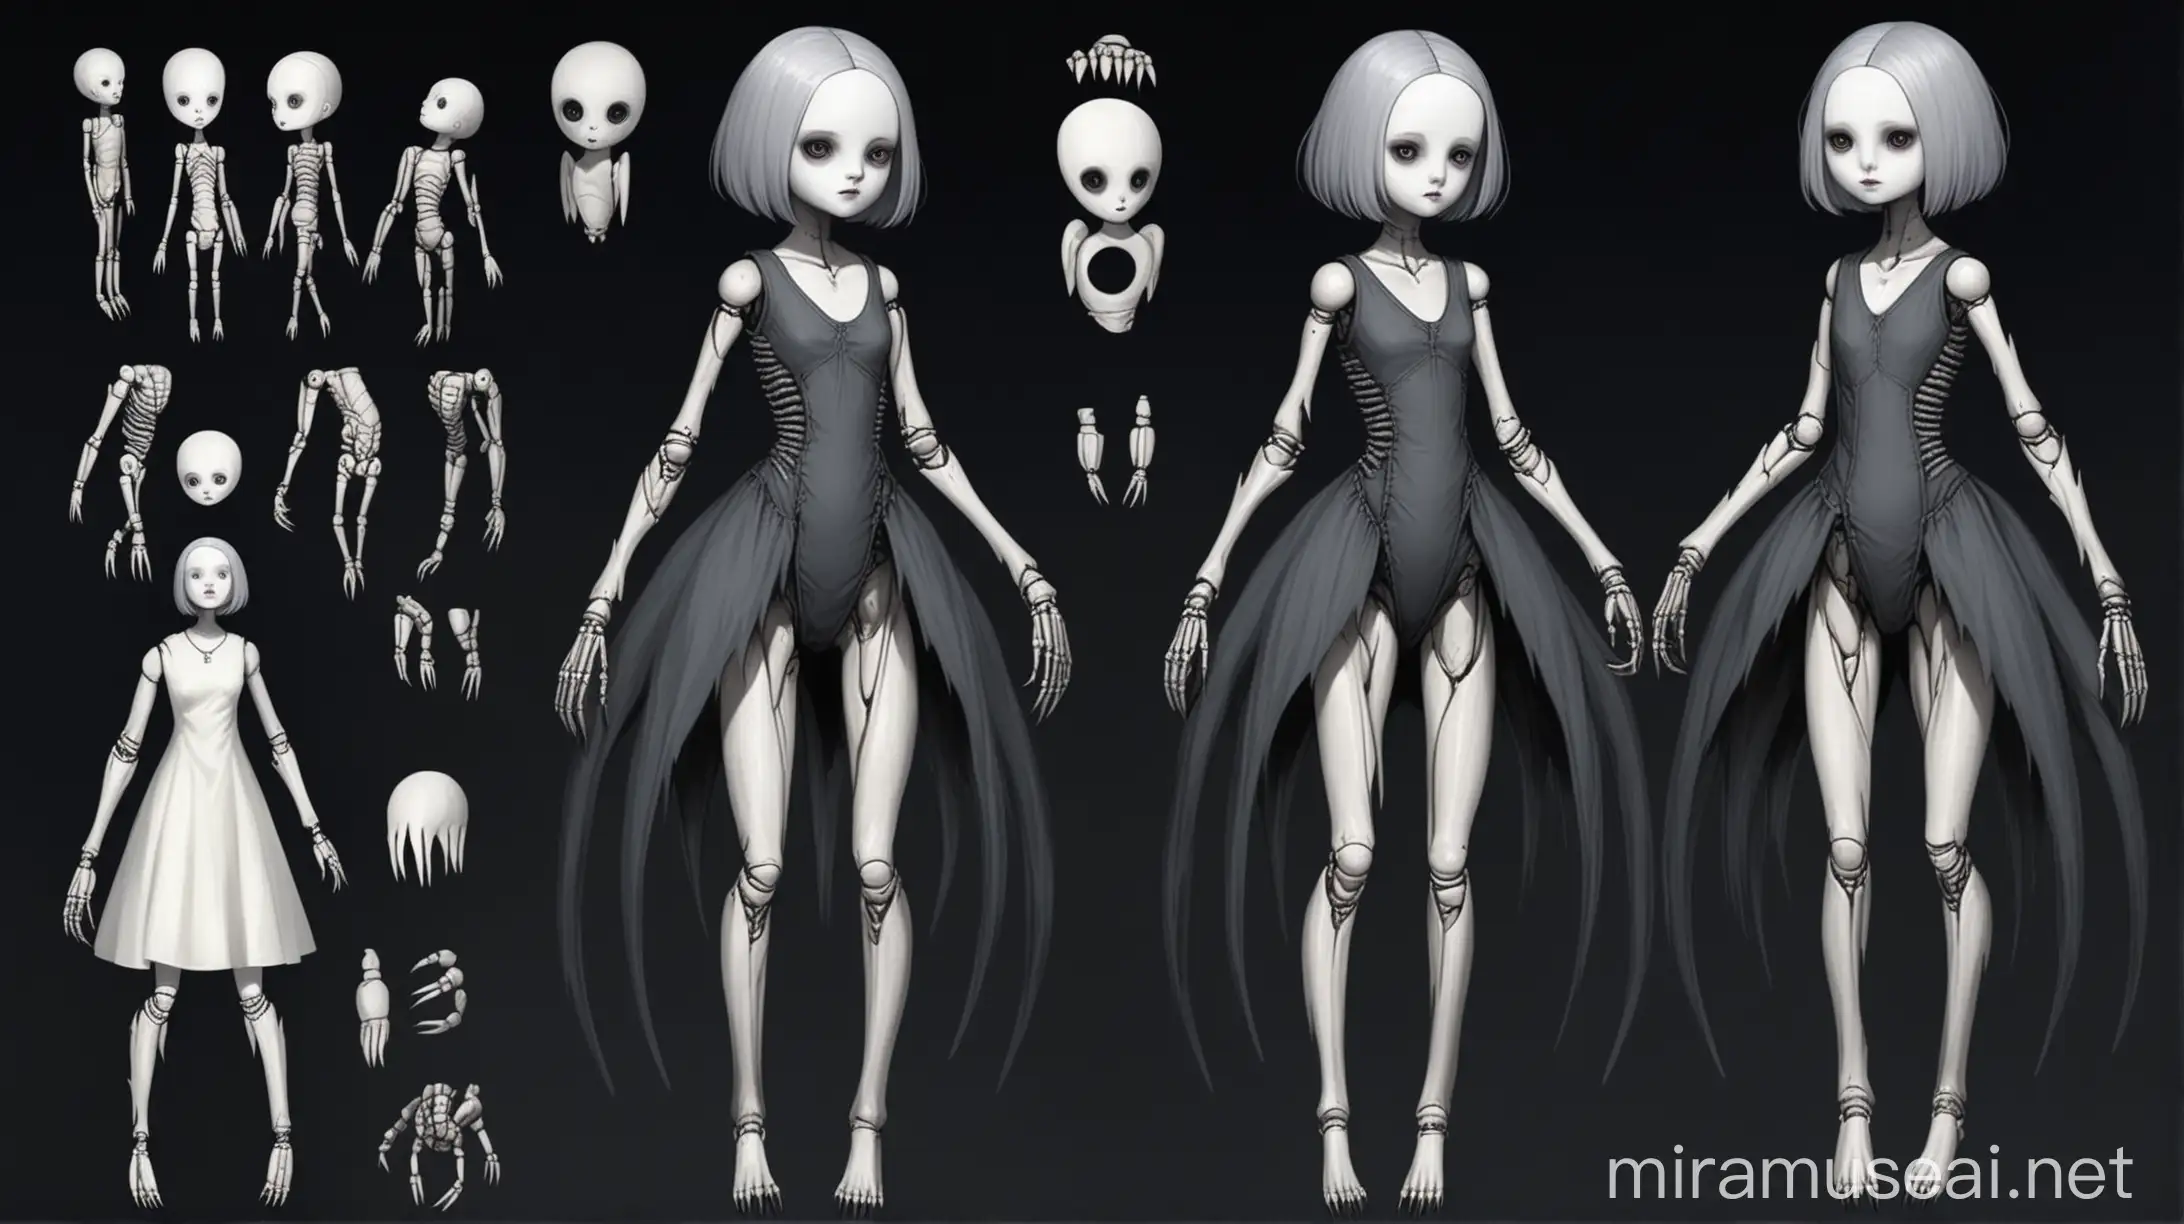 grey short hair, pale white doll like skin, cryptid, doll joints on her bodyparts, gothic style sleeveless dress, character reference, battleform 